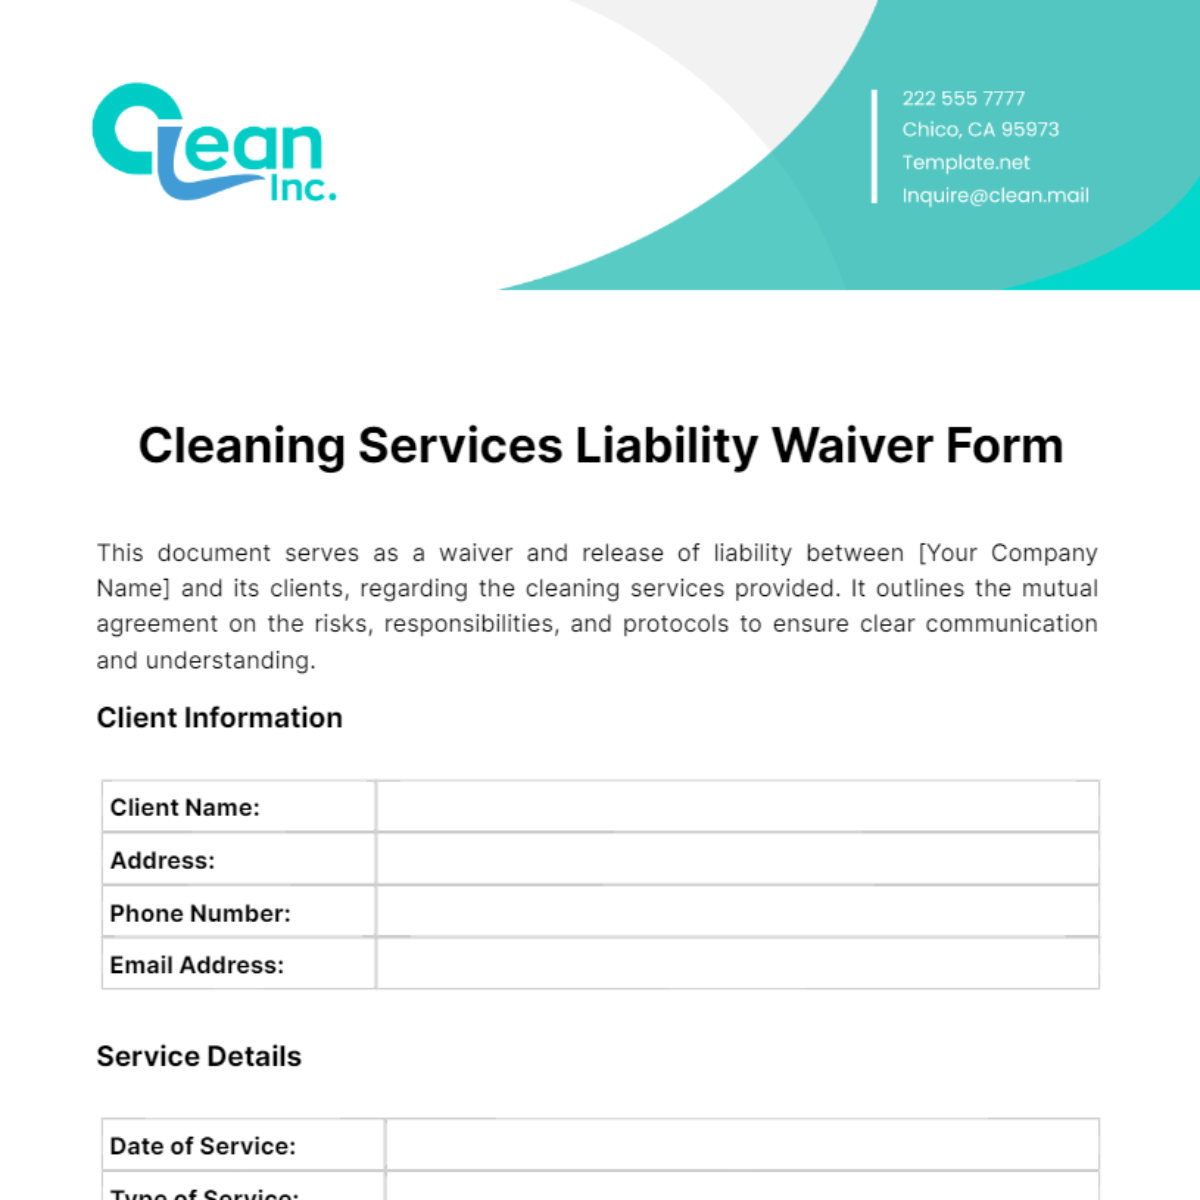 Cleaning Services Liability Waiver Form Template